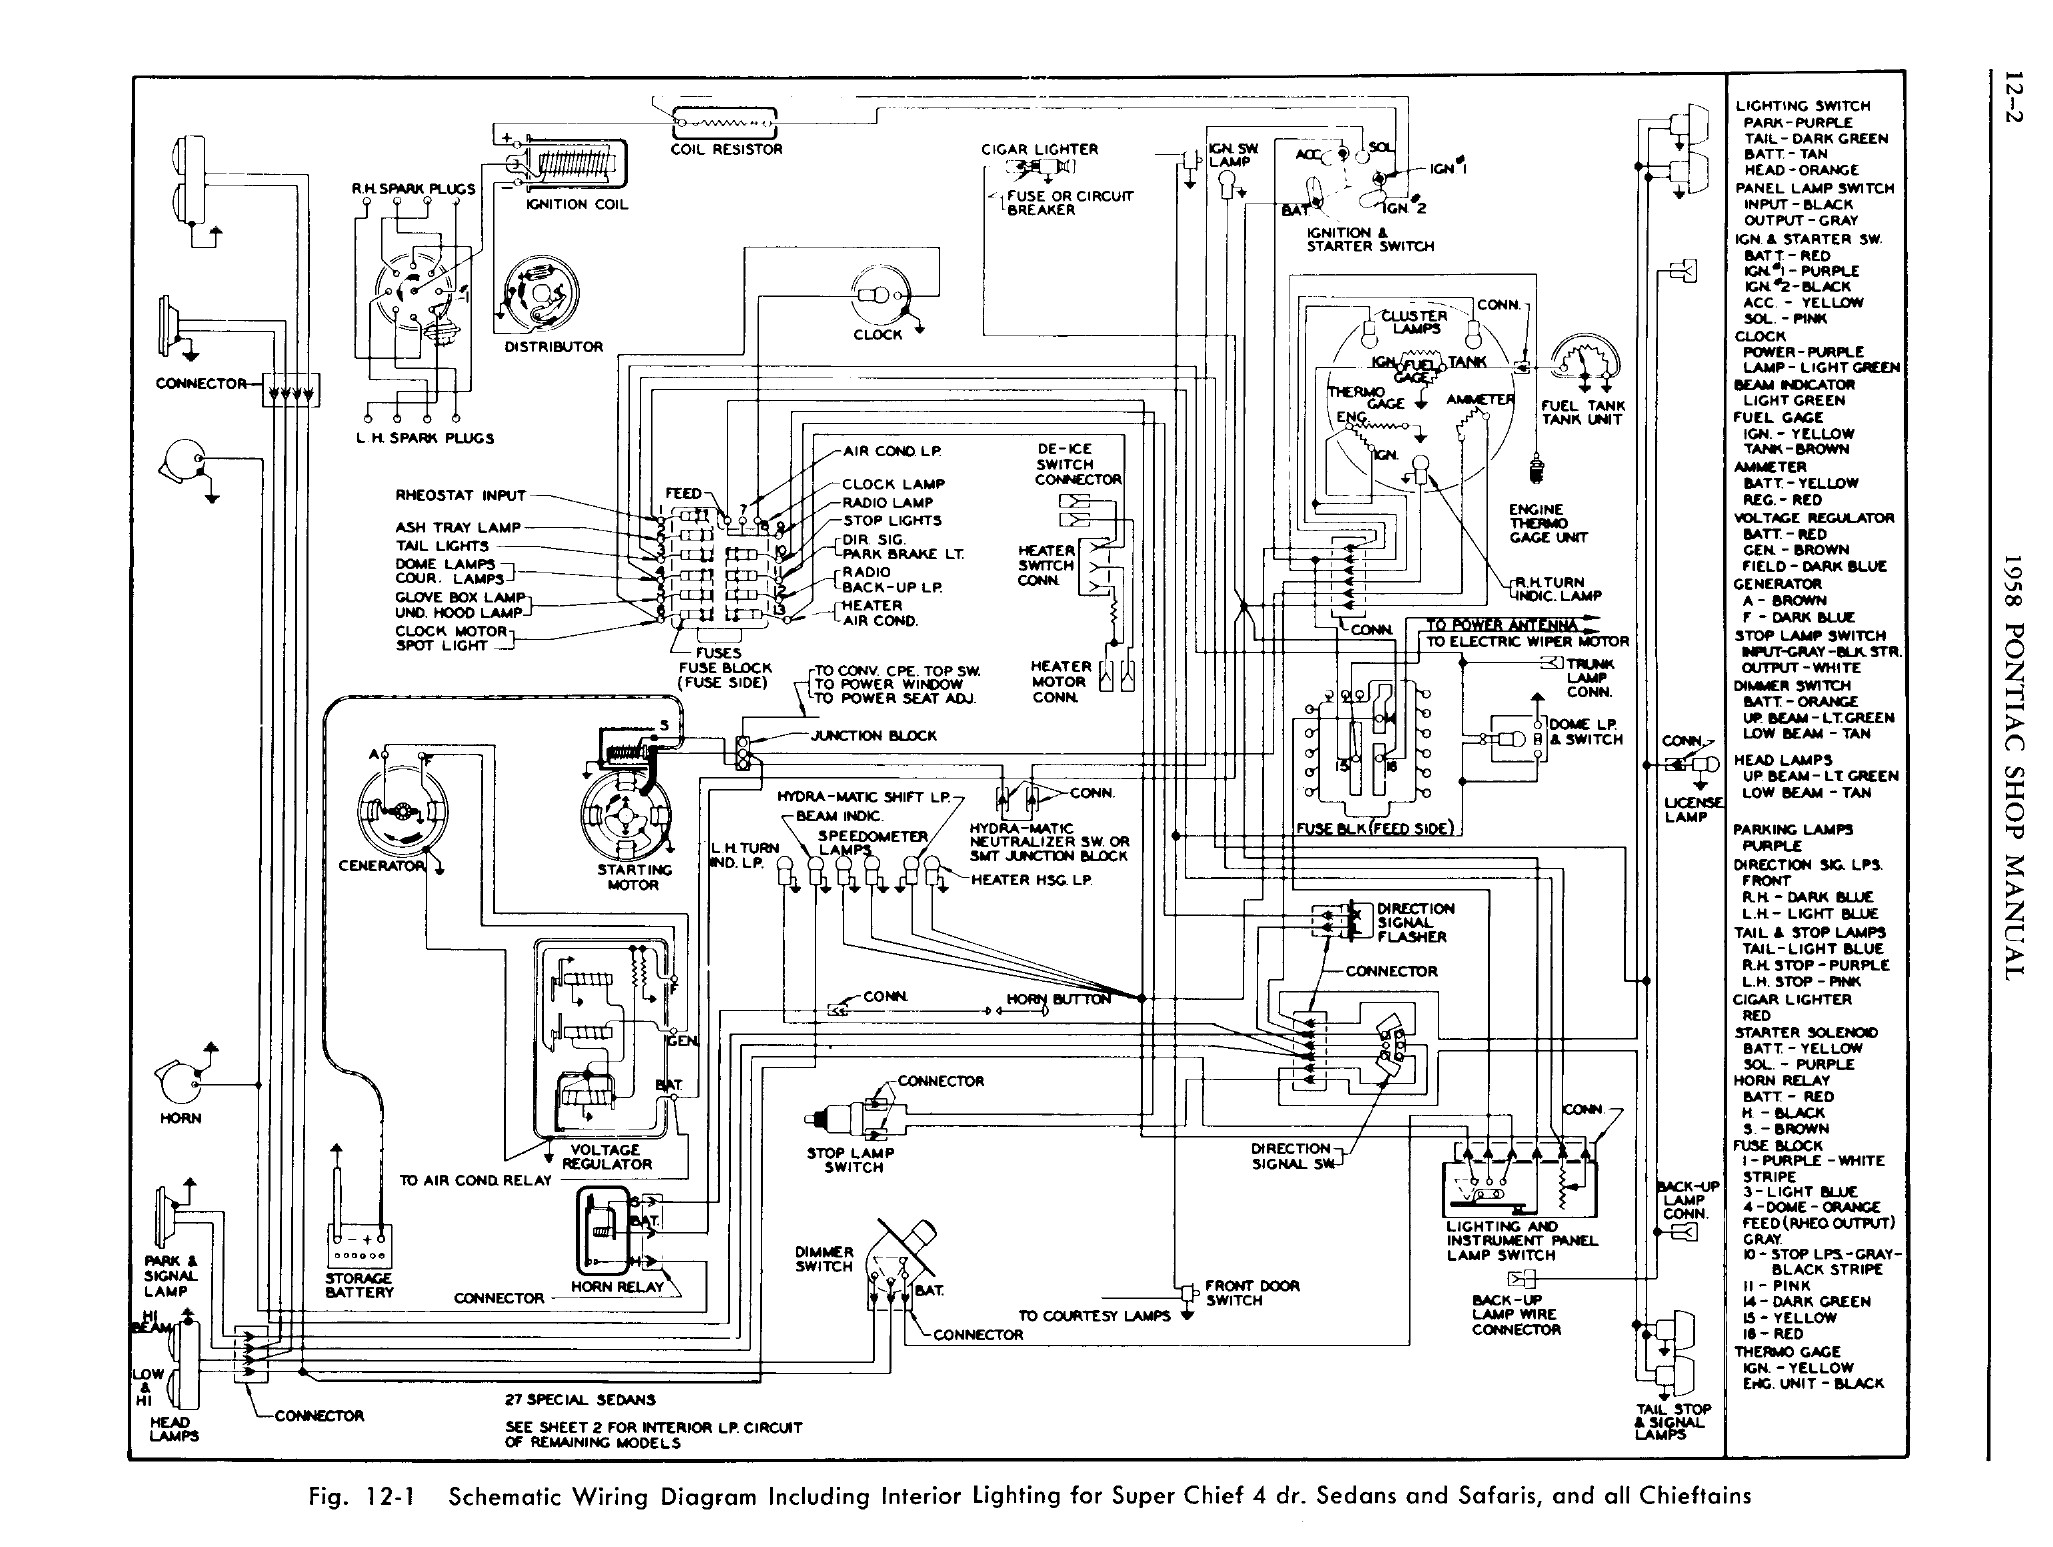 1958 Pontiac Shop Manual- Electrical Page 2 of 55